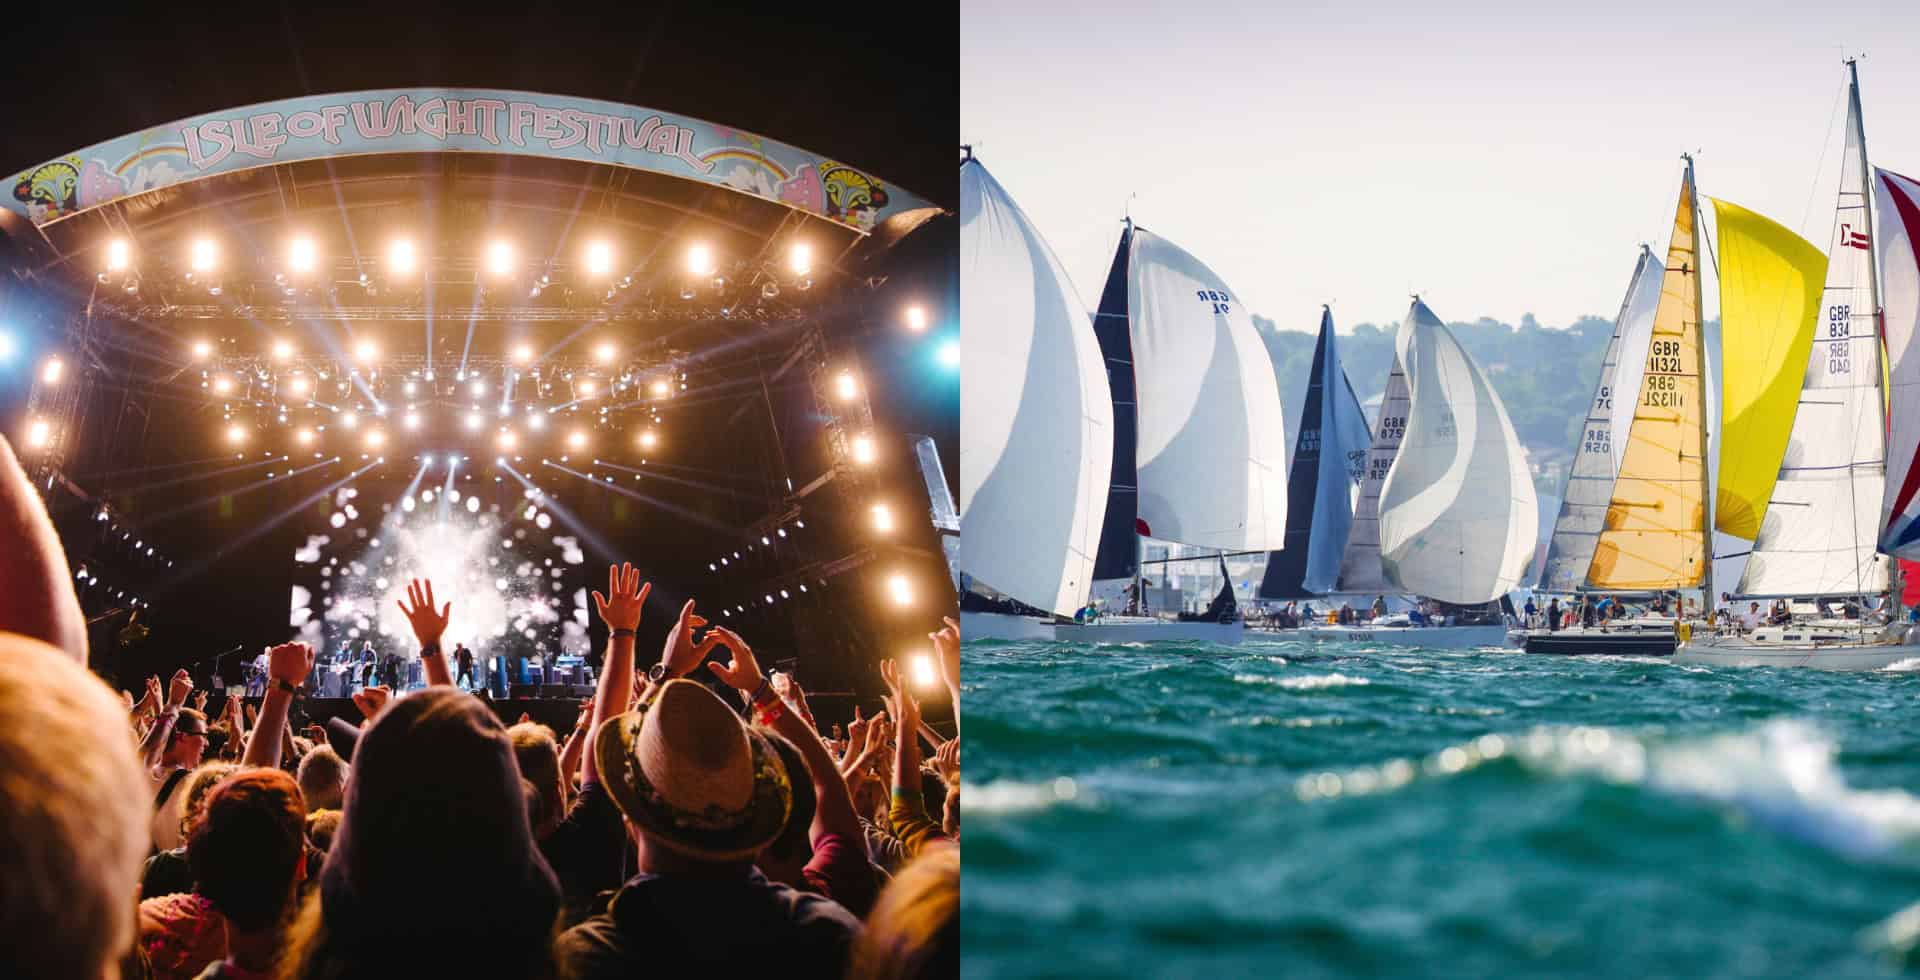 split screen image showing Isle of Wight Festival and Round the Island Boat Race